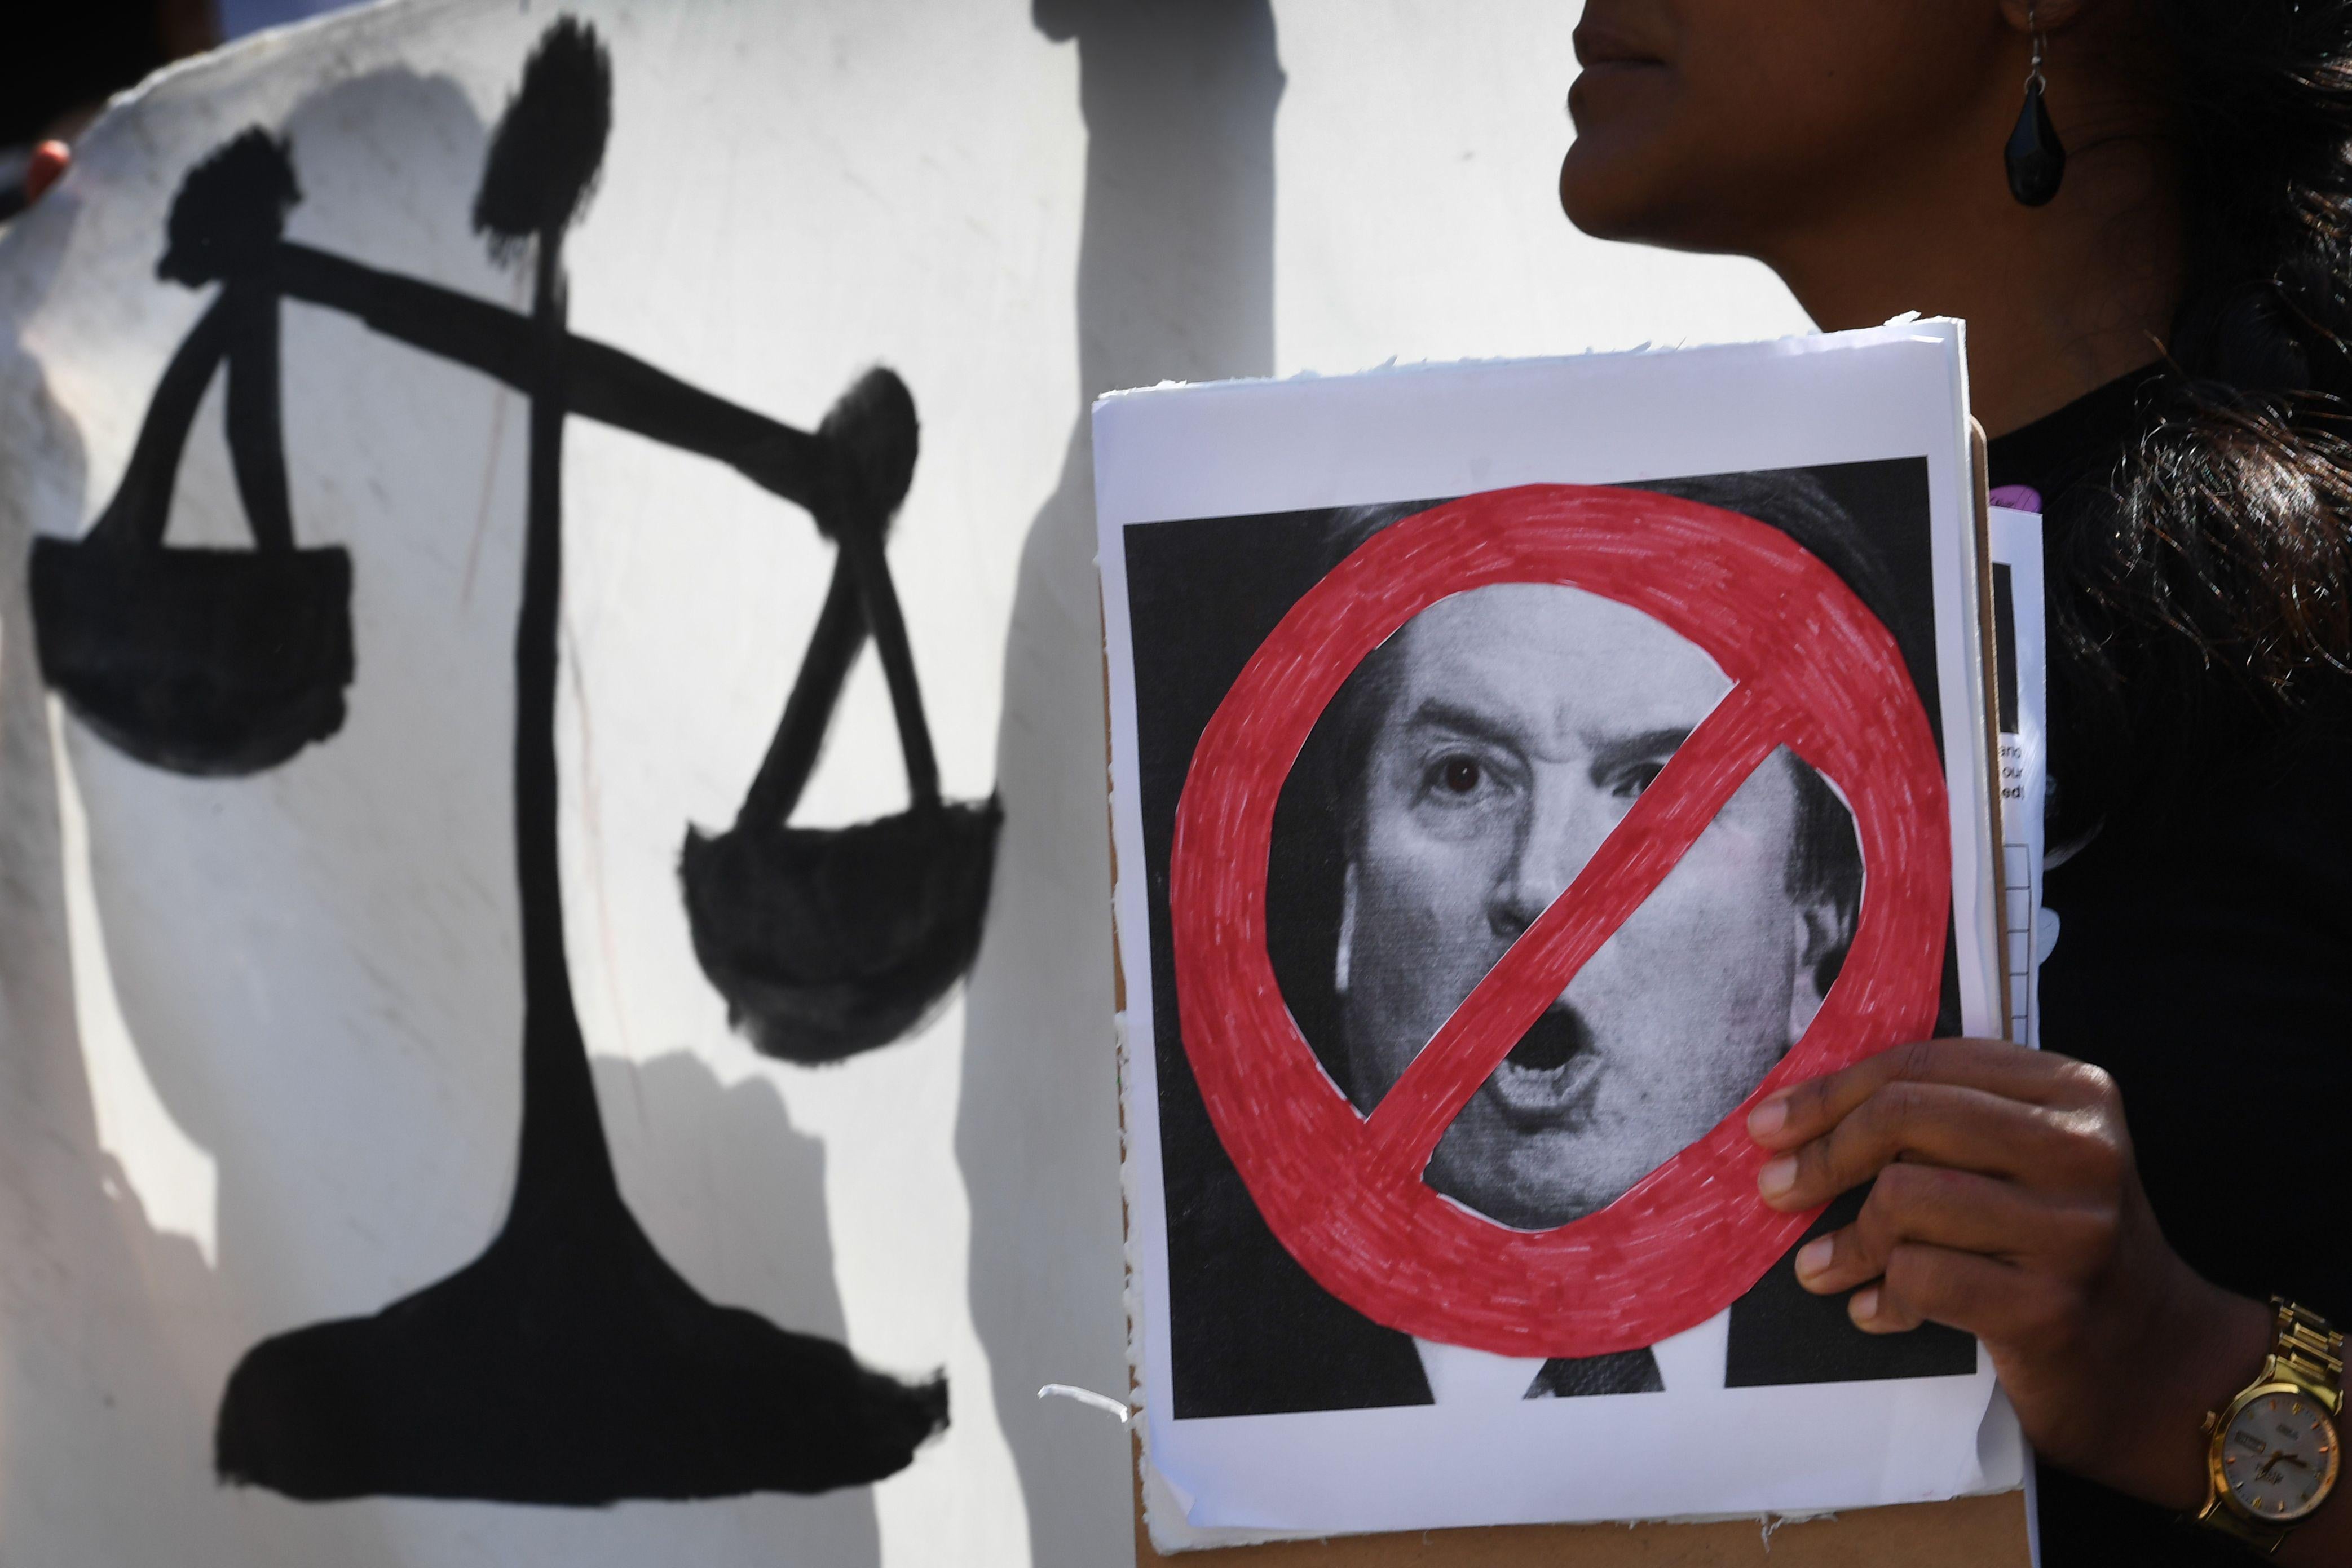 A woman holding a poster showing Kavanaugh's face crossed out, in front of a poster showing the scales of justice.